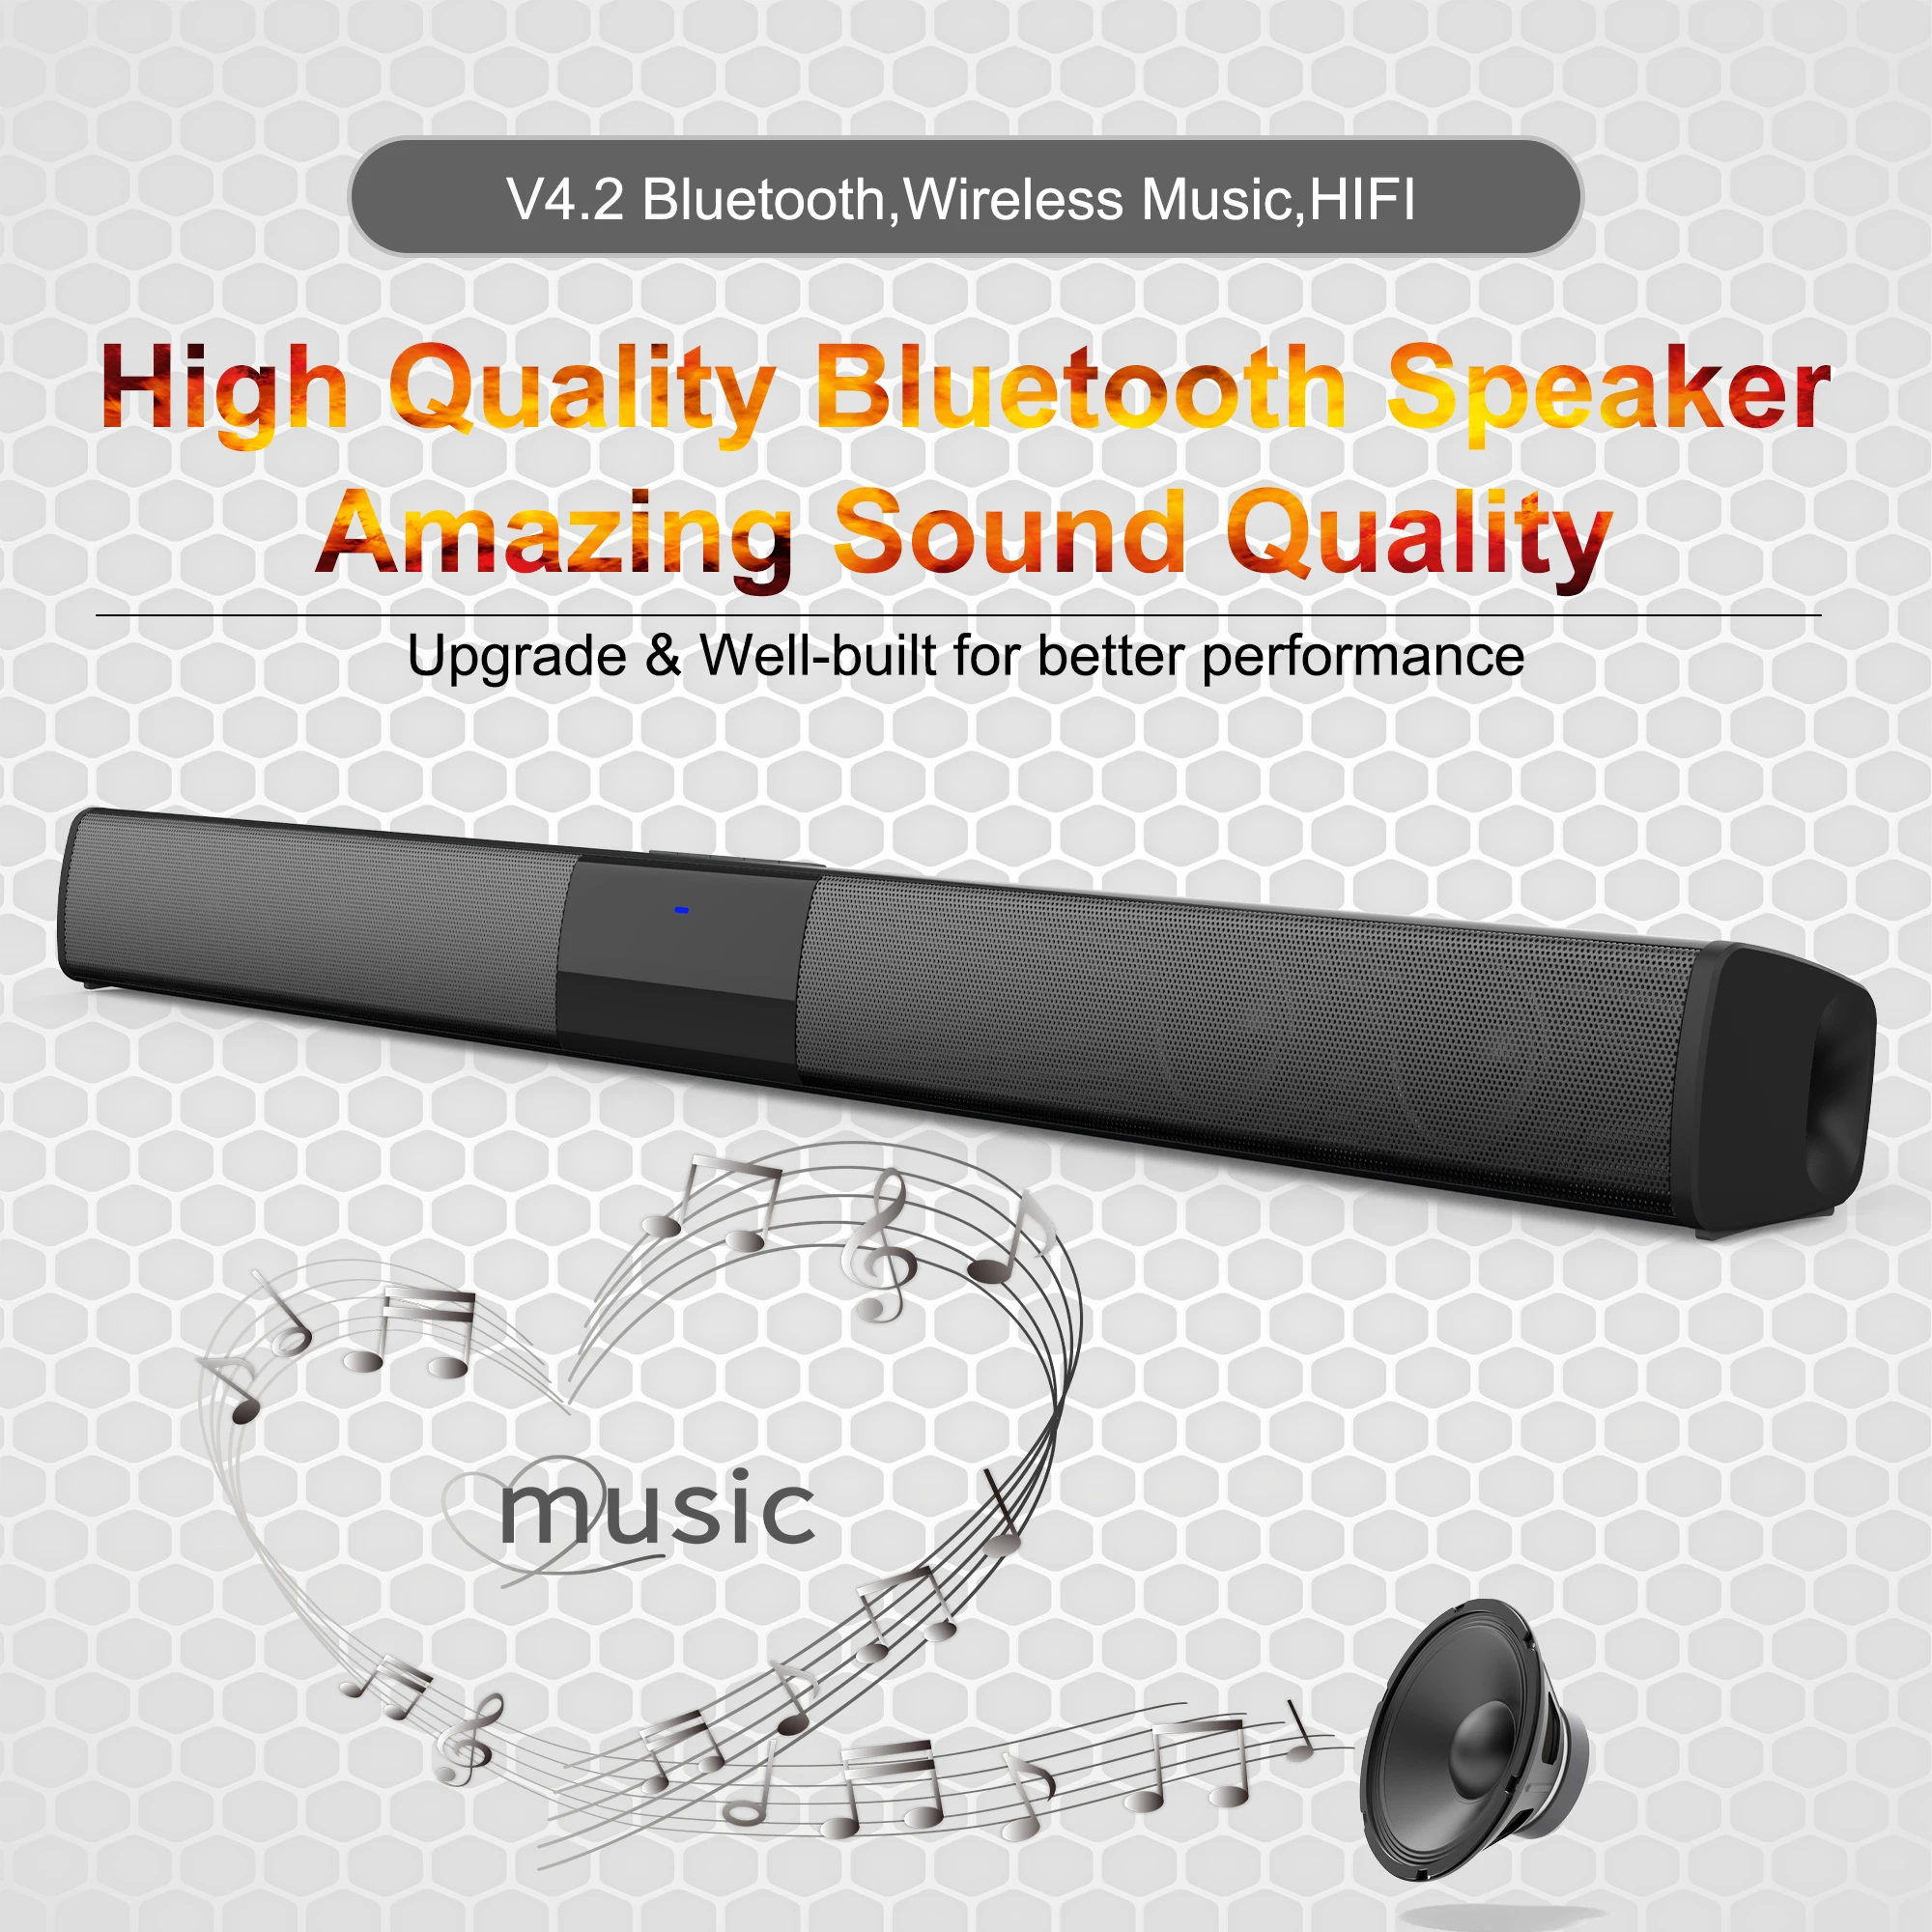 Home theater HIFI Portable Wireless Bluetooth Speakers column Stereo Bass Sound bar FM Radio USB Subwoofer for Computer TV Phone enlarge